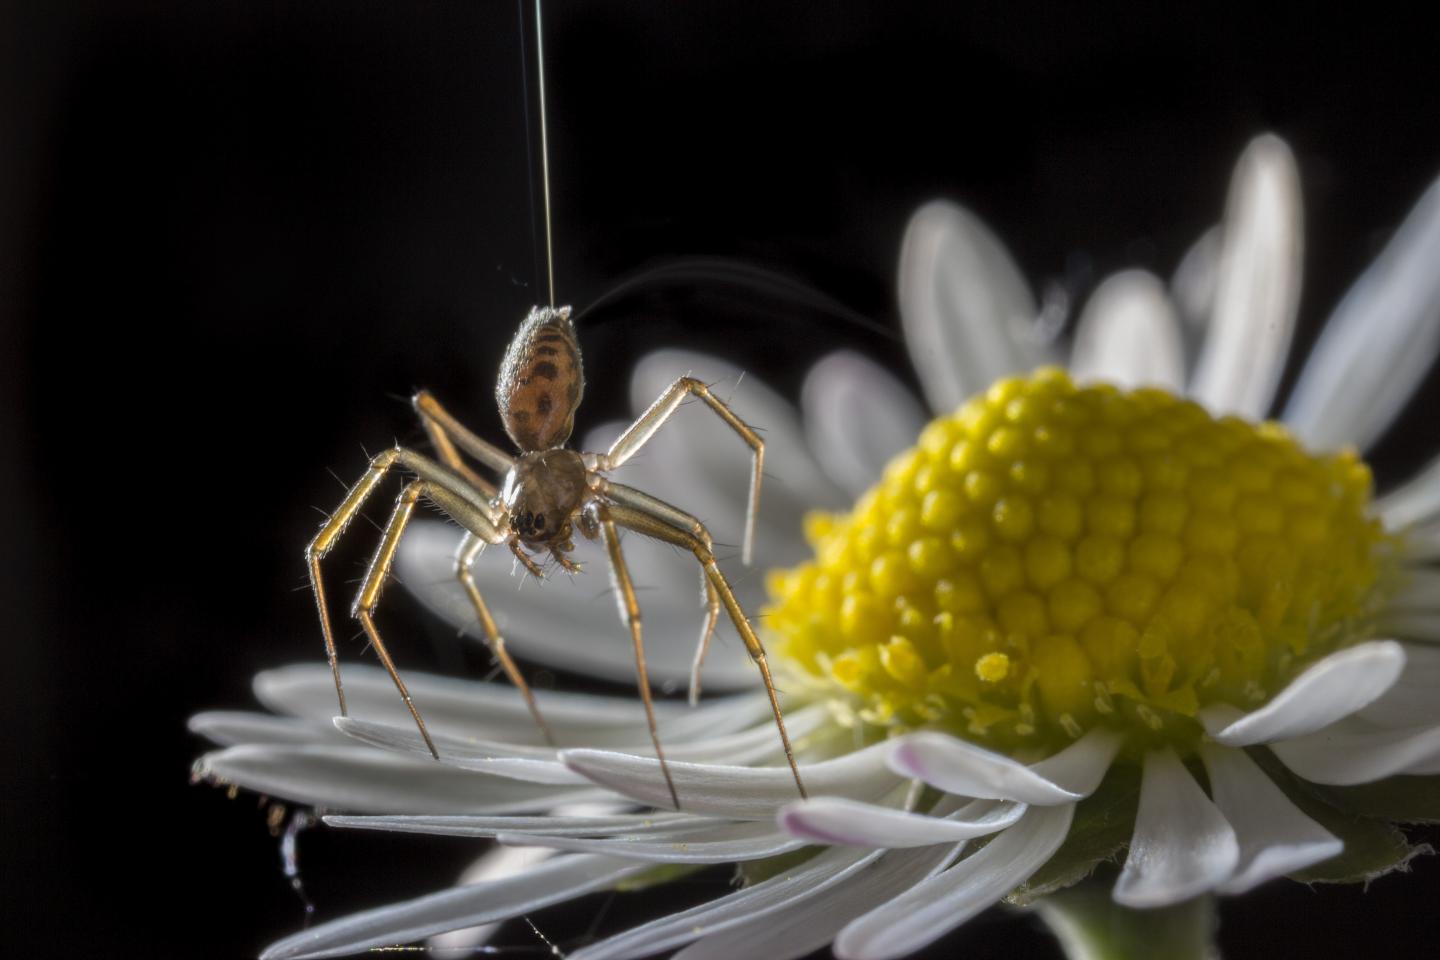 Ballooning Spider Showing a Tiptoe Stance on a Daisy